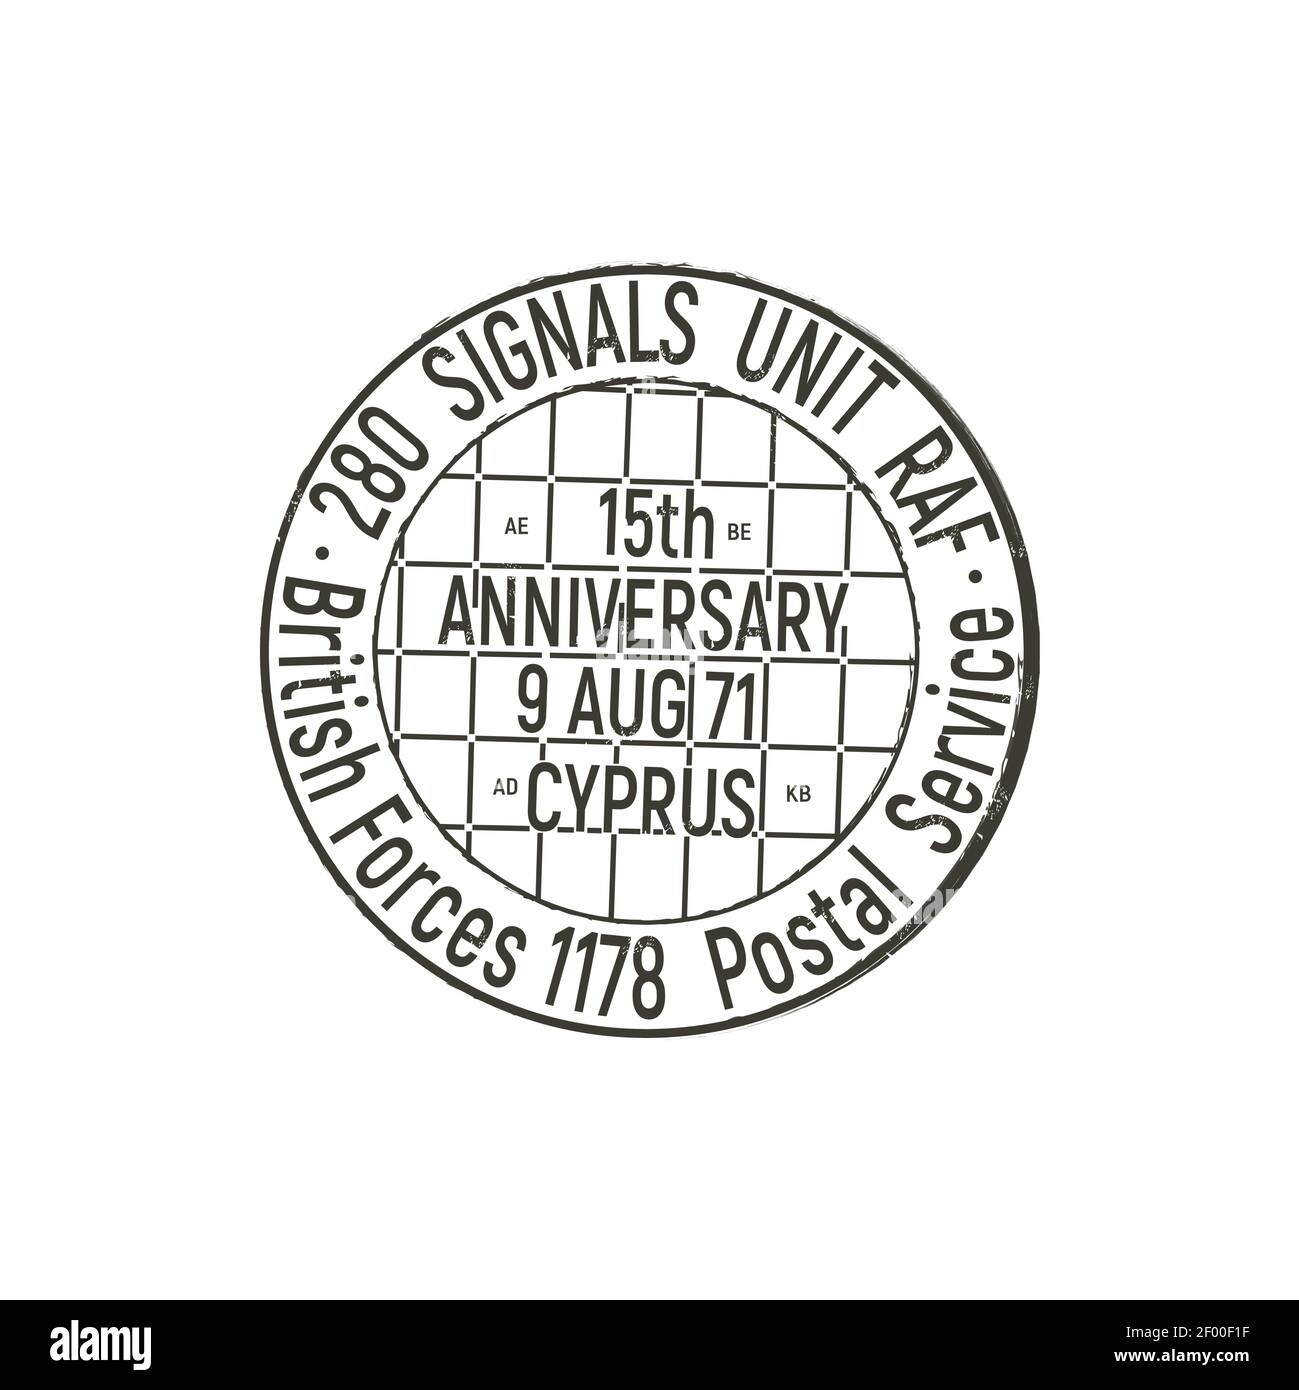 Postal service round stamp isolated monochrome icon. Vector mark dedicated to 15th anniversary of Cyprus, British Forces postal sign with date. Templa Stock Vector